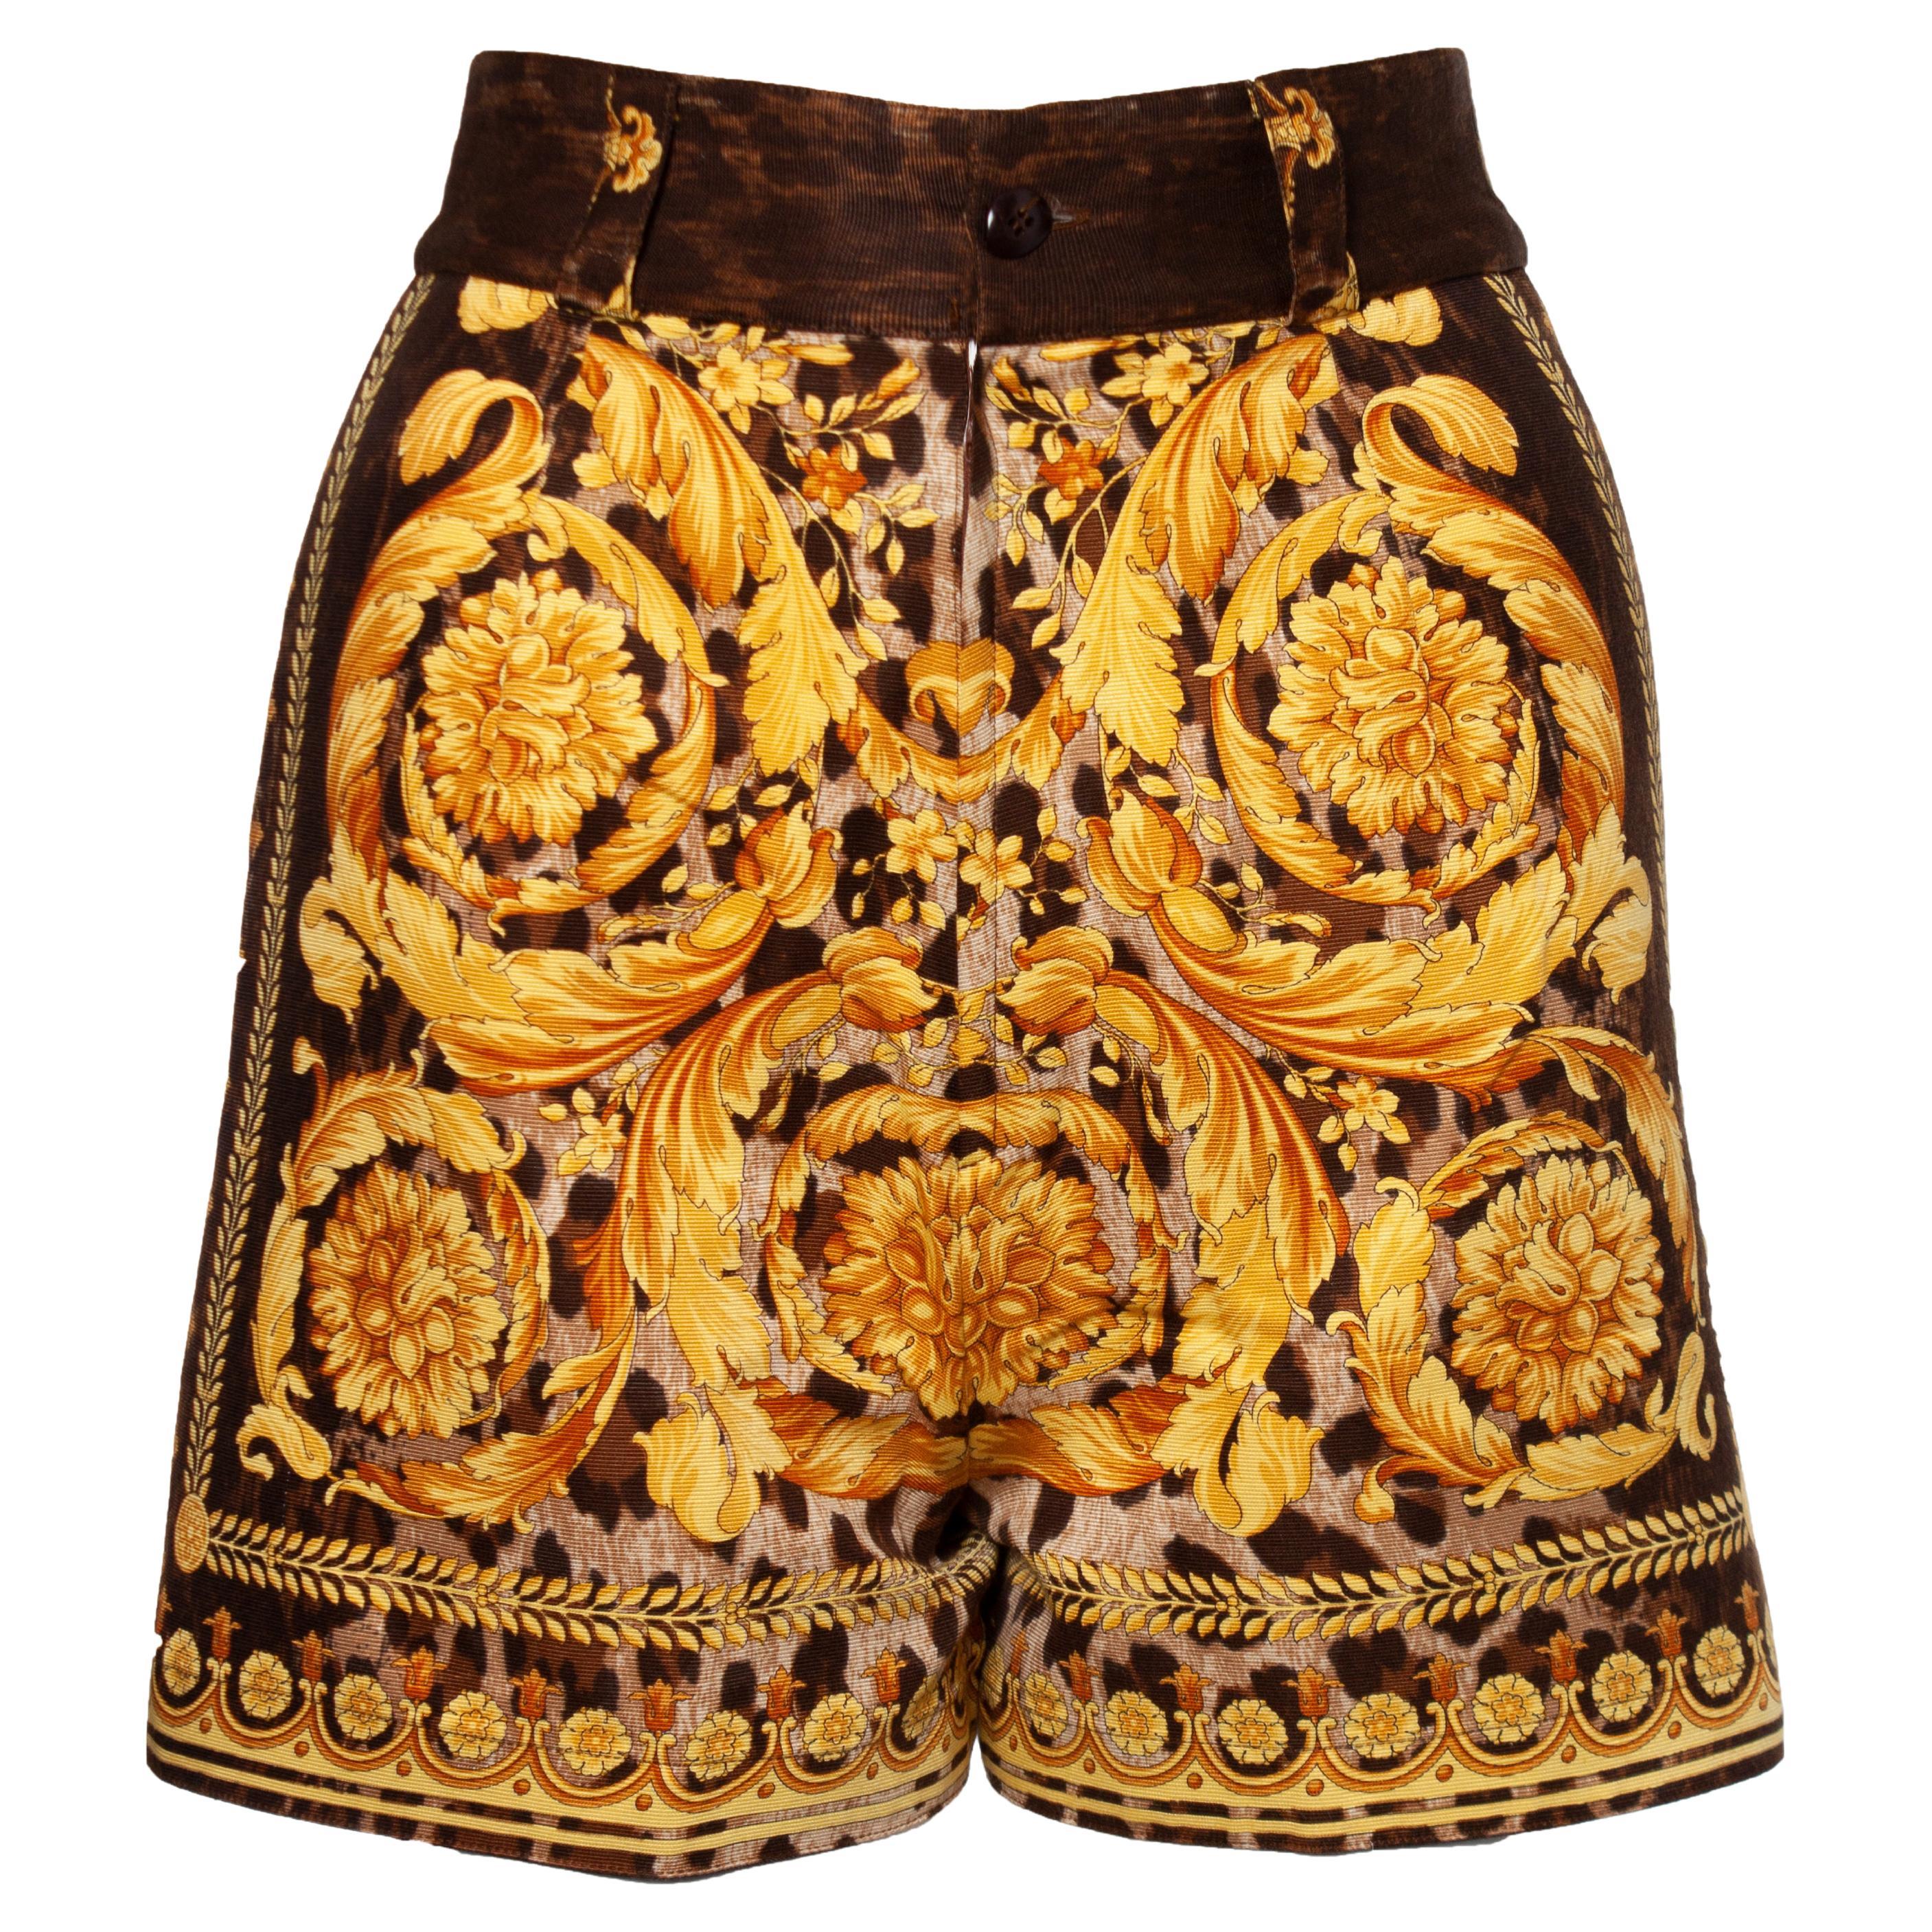 Gianni Versace Couture, Barocco printed shorts For Sale